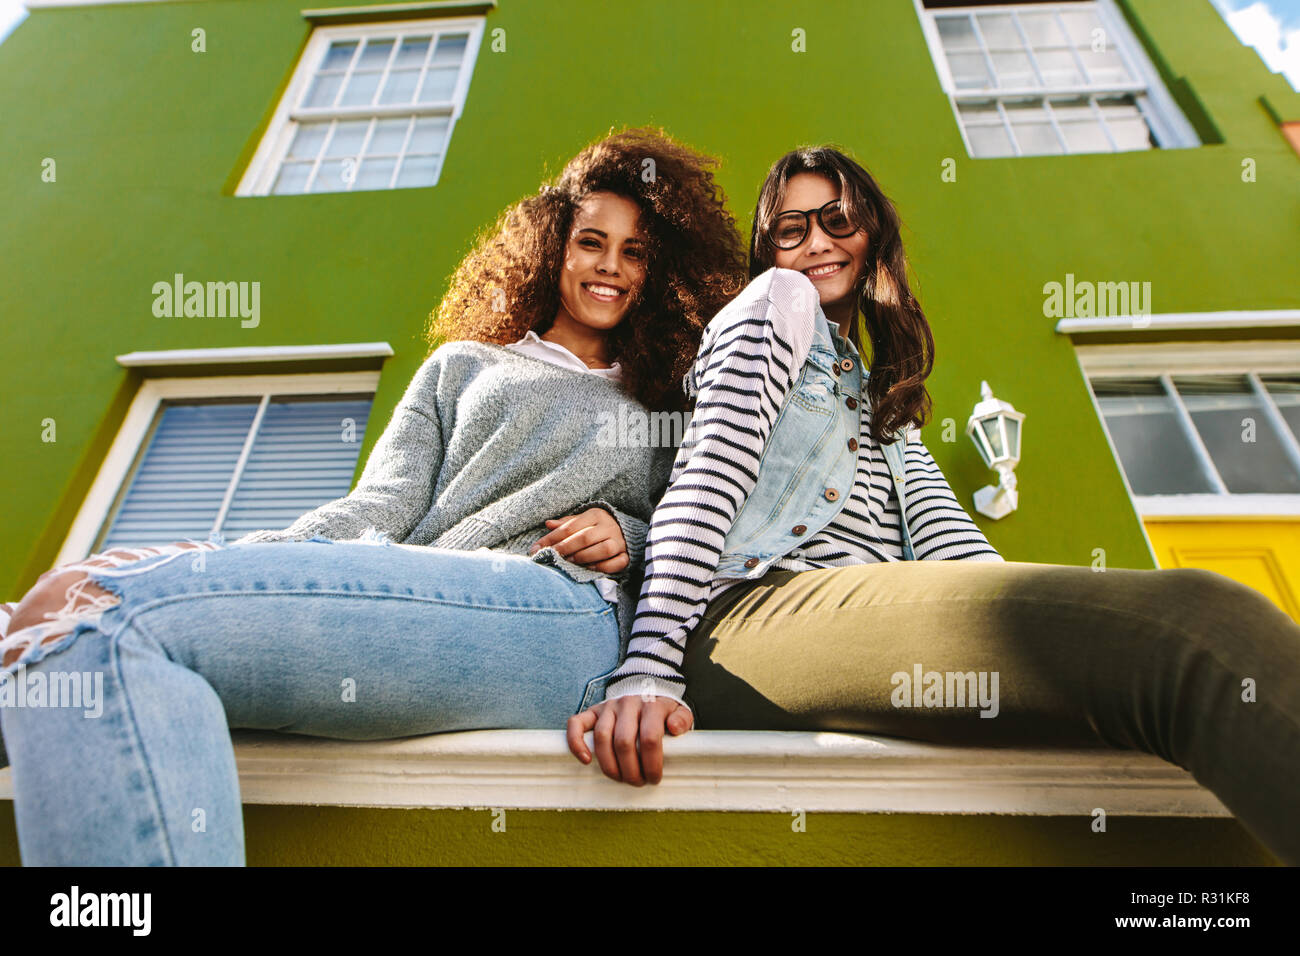 Low angle view of two women sitting on bench outside a green house. Female friends hanging out outdoors looking at camera. Stock Photo